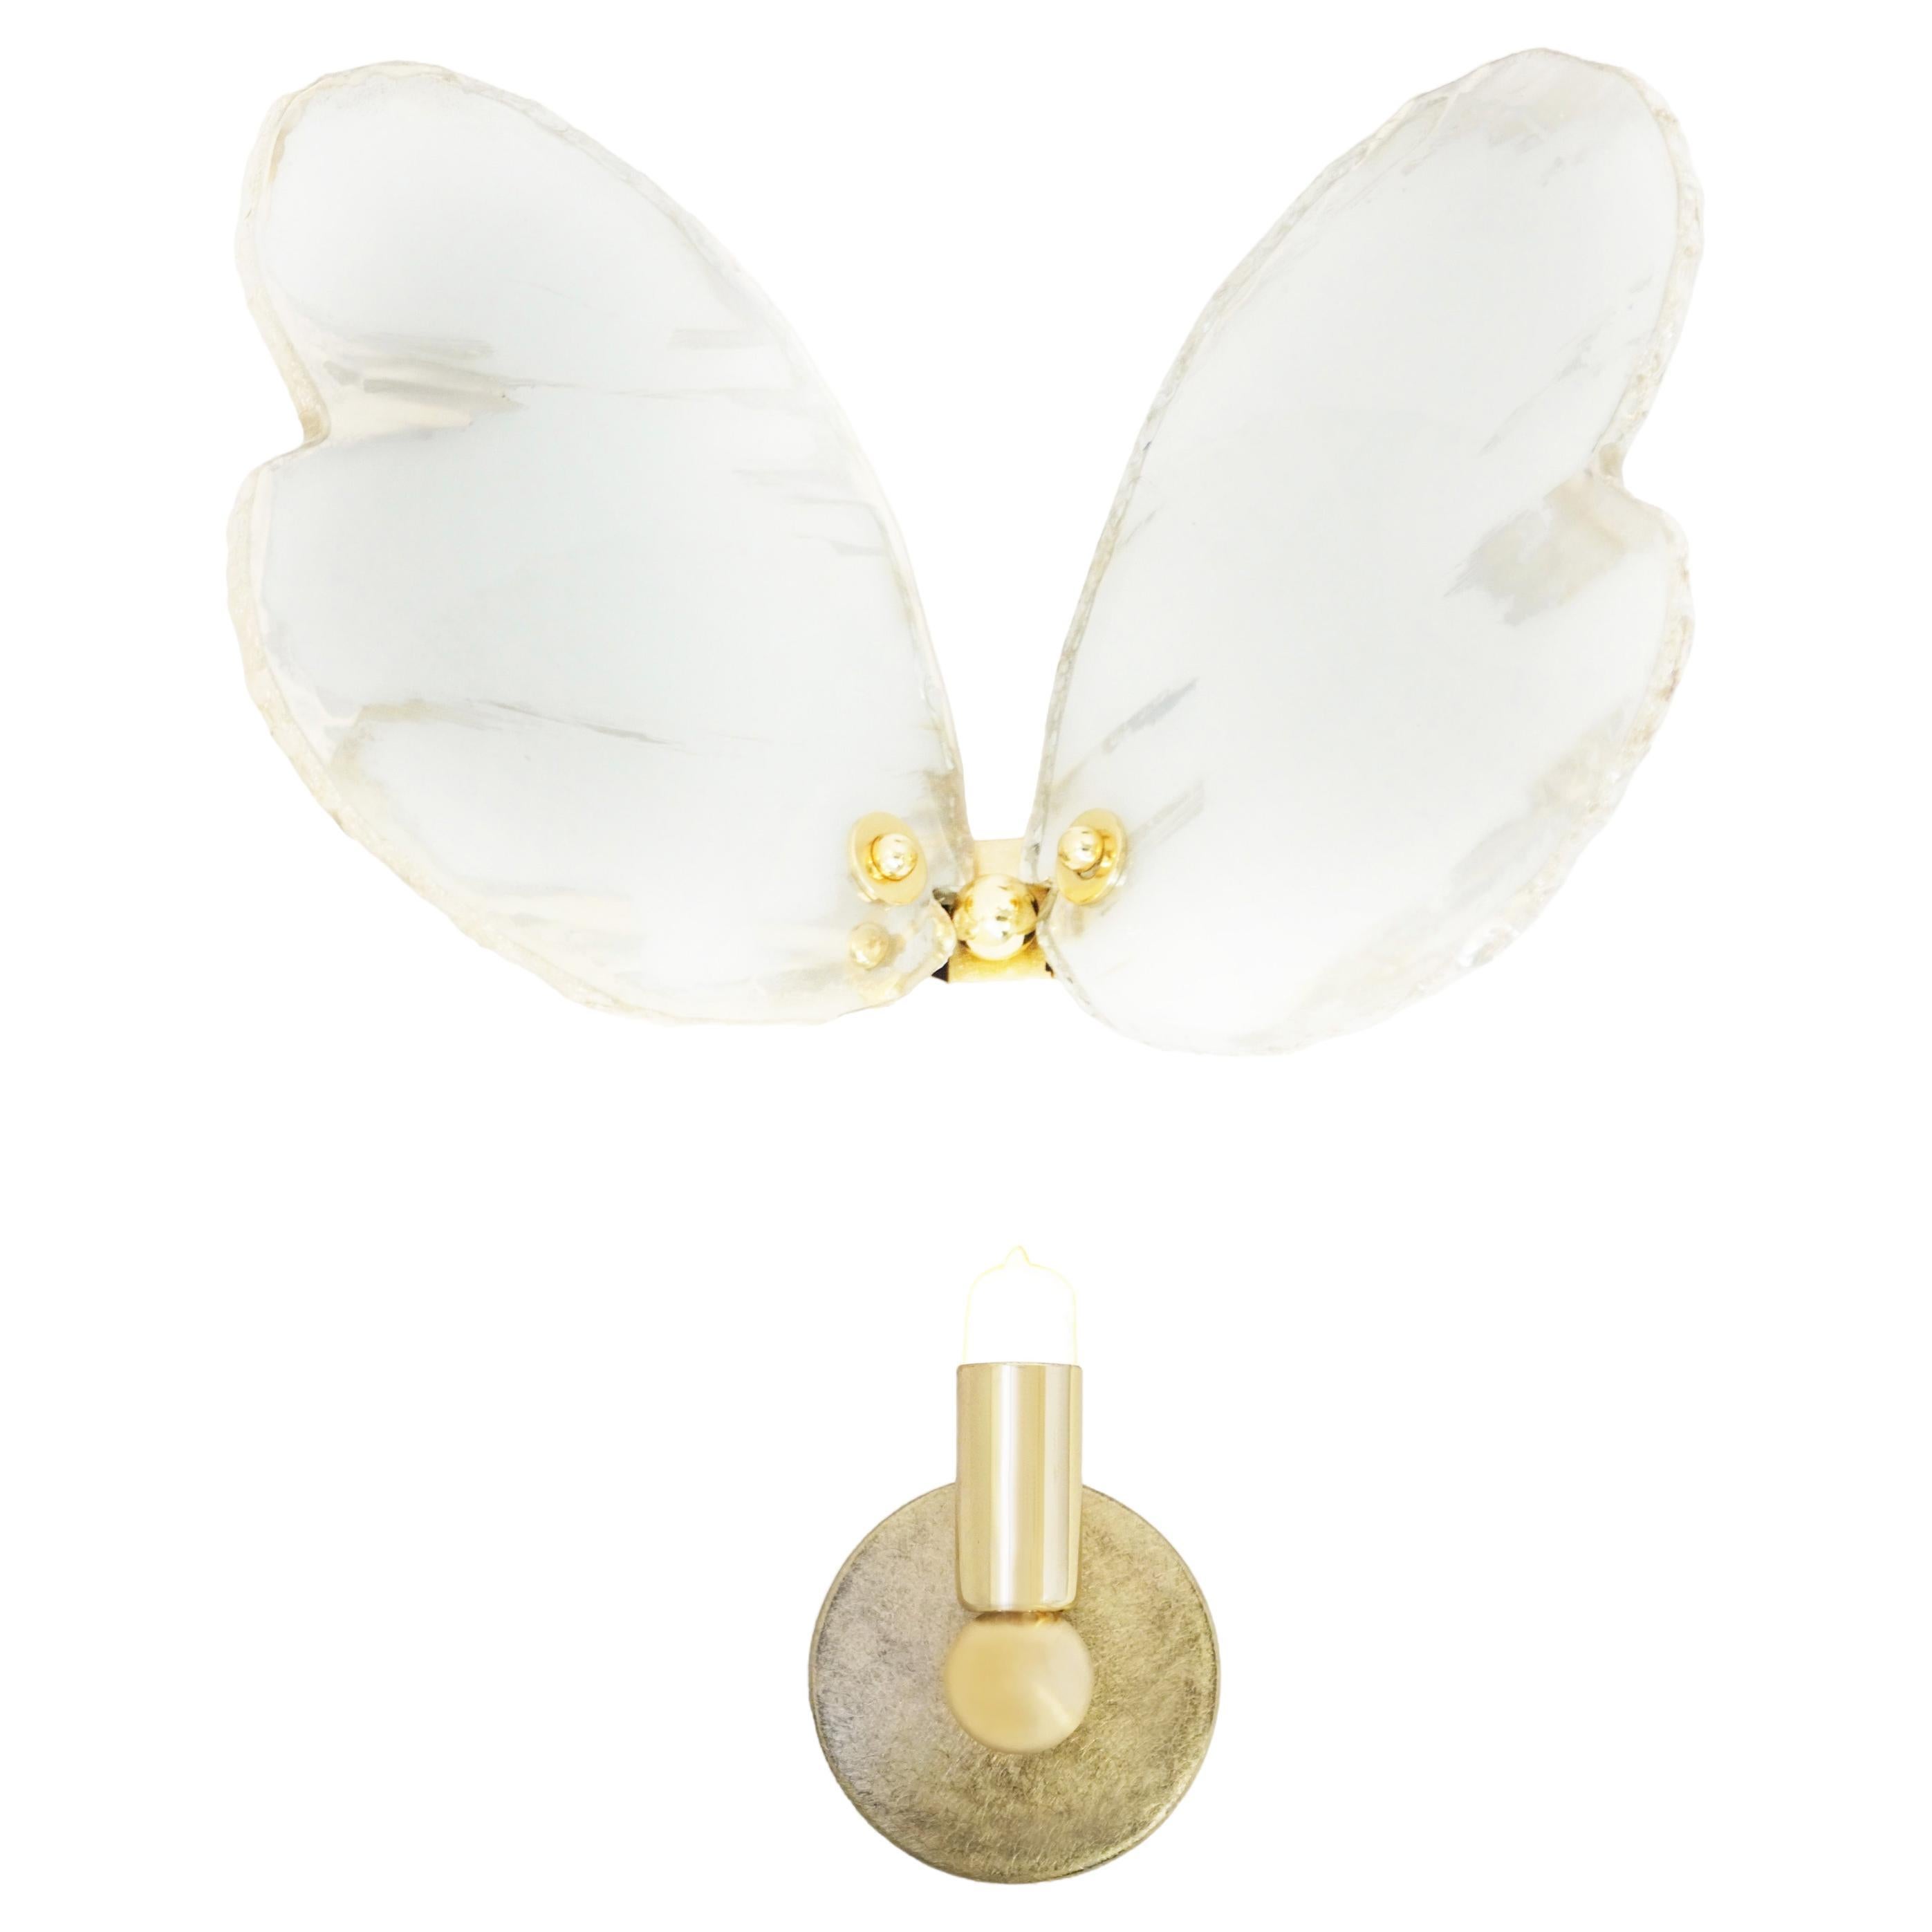  Butterfly Contemporary Wall light sculpture , art Silvered Glass white color  